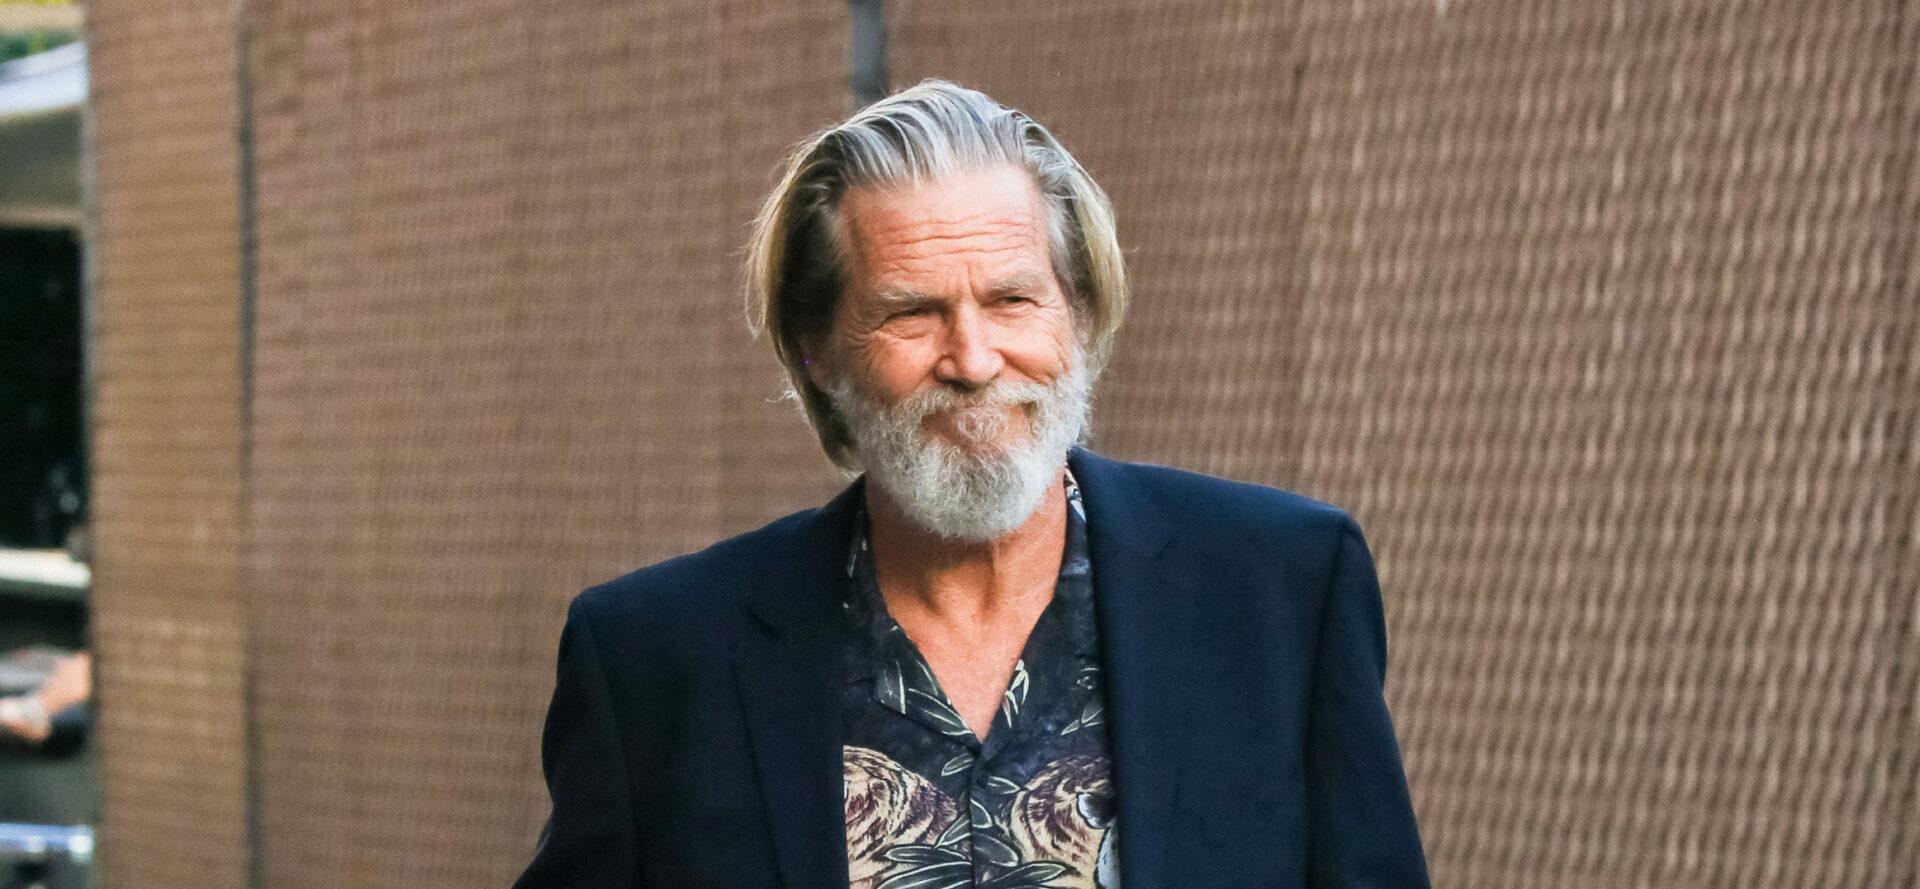 Jeff Bridges Admits He Was “At Death’s Door” After Fighting COVID And Cancer